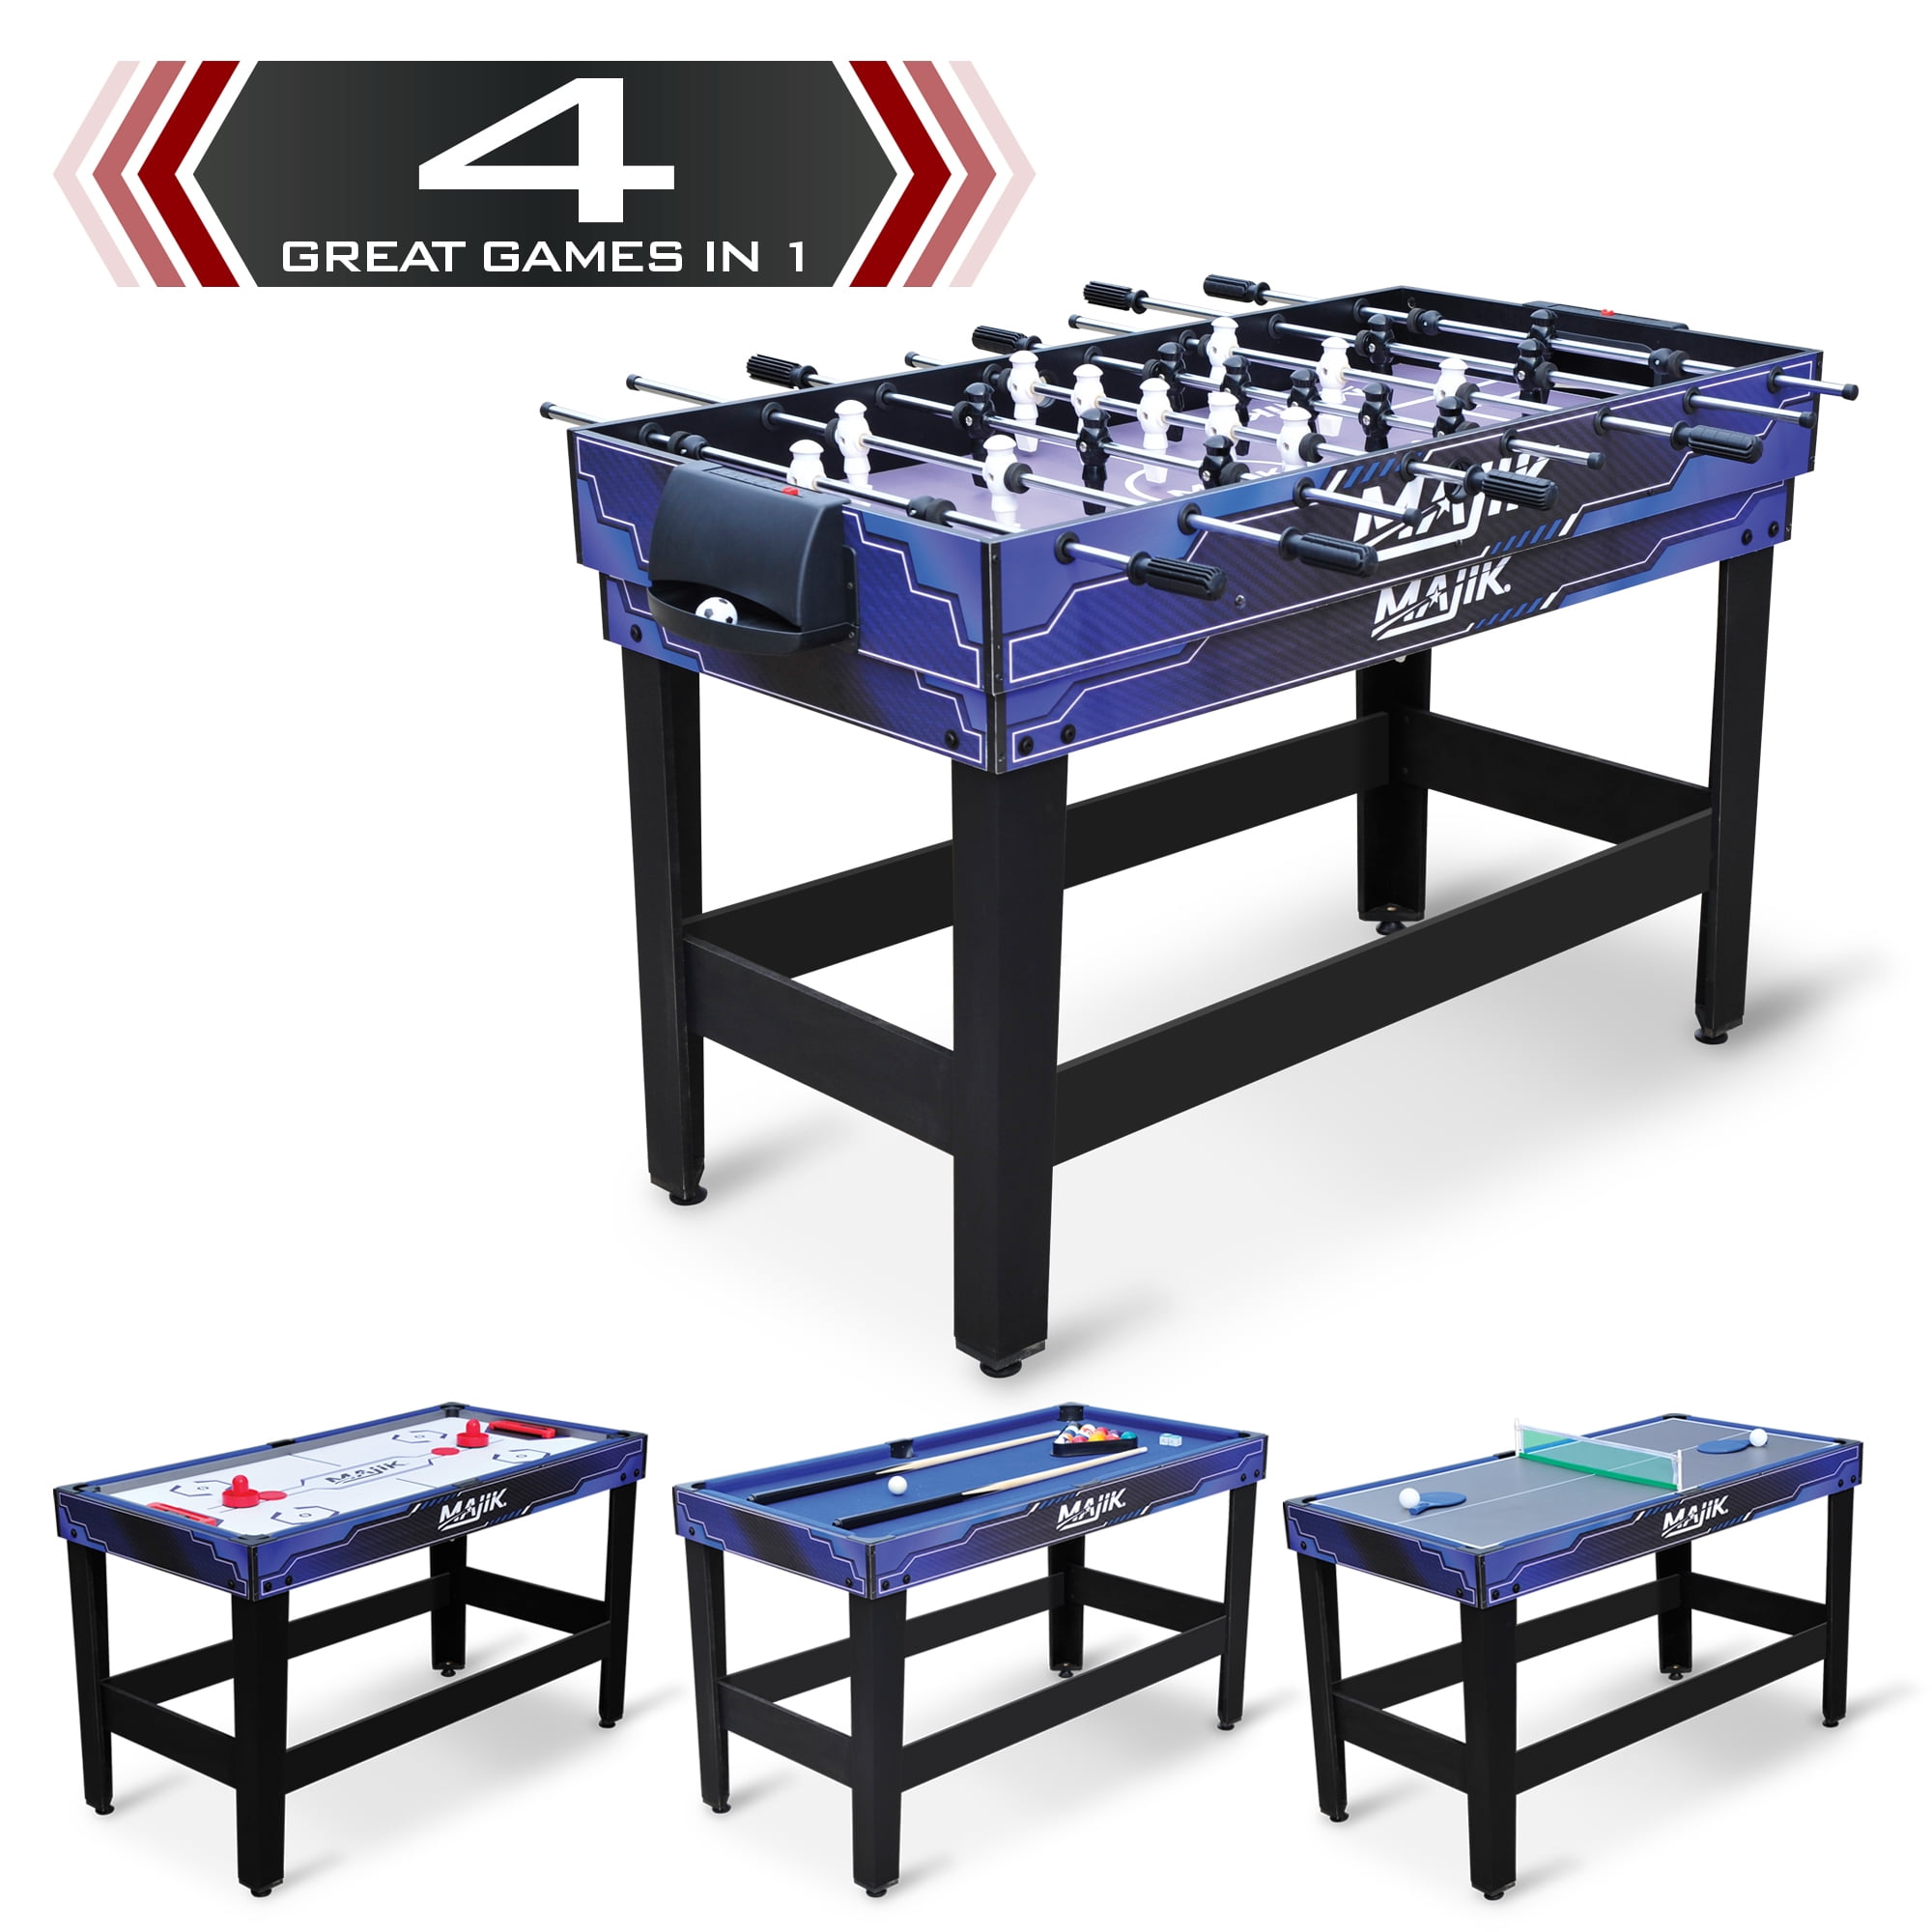 MD Sports Multi Game Table 48"" for sale online